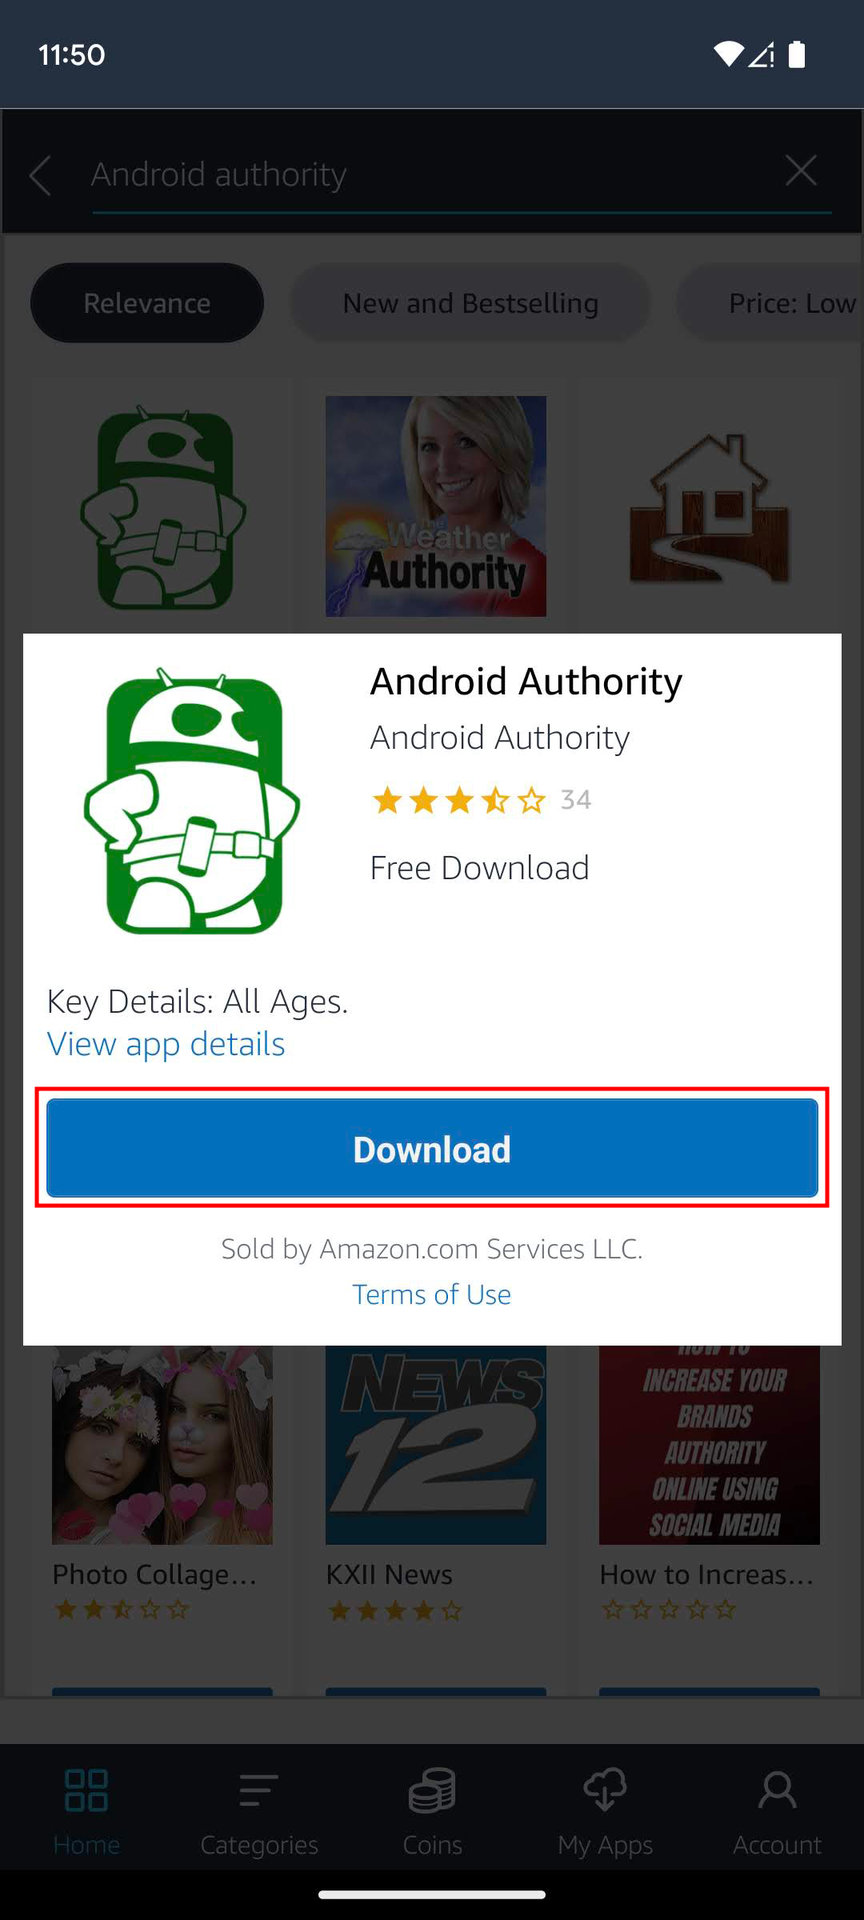 How to install apps from the Amazon App Store (1)